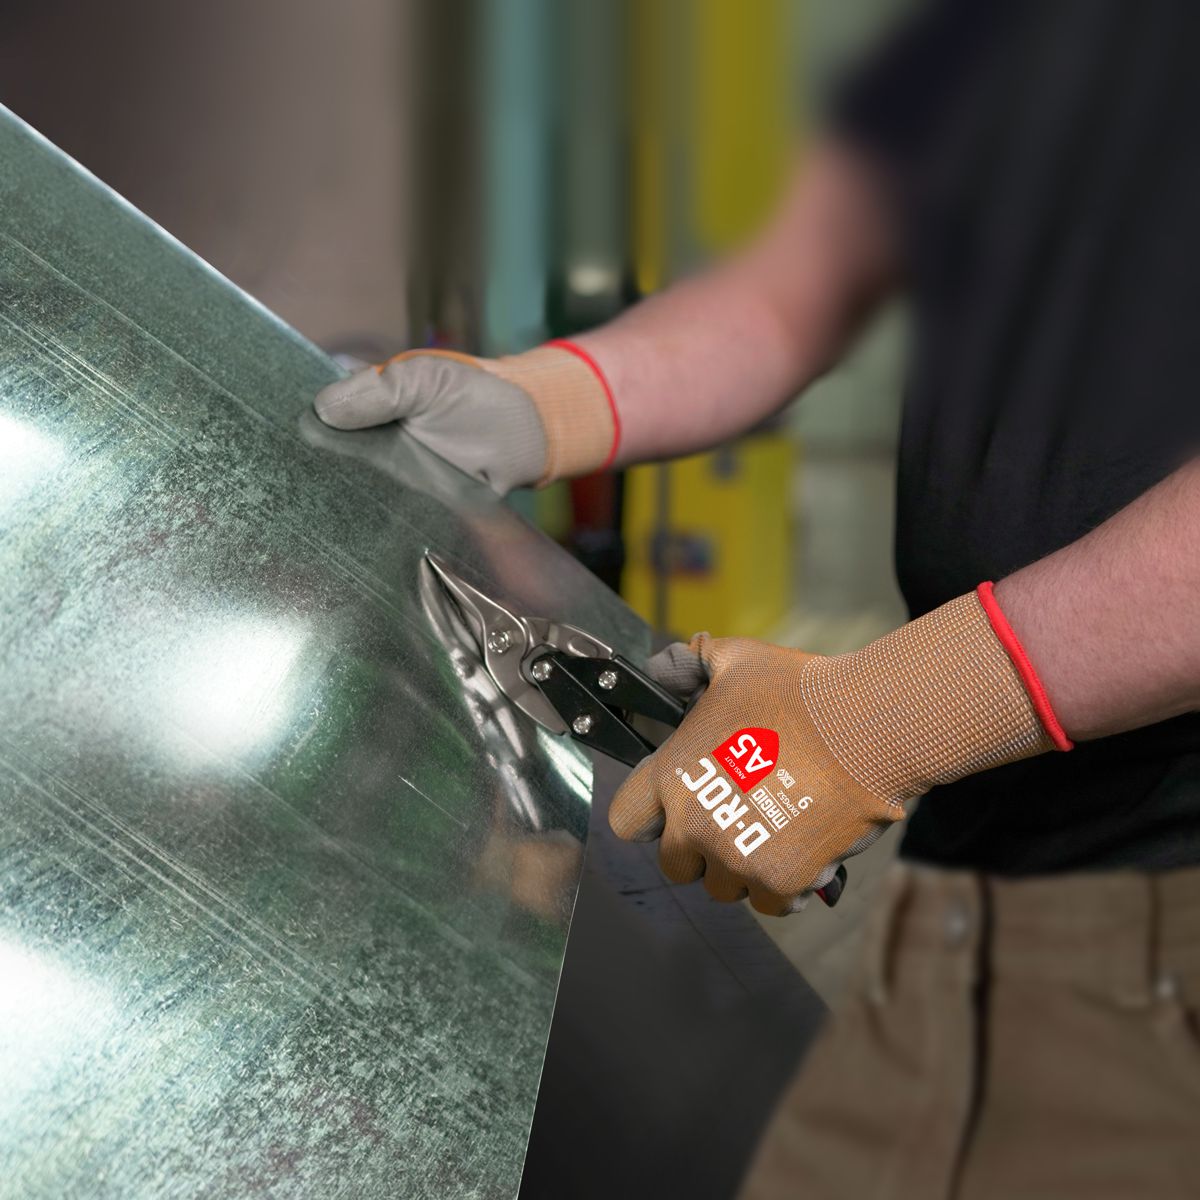 Magid revolutionizes Coreless Glove Cut Protection with DX+ Technology